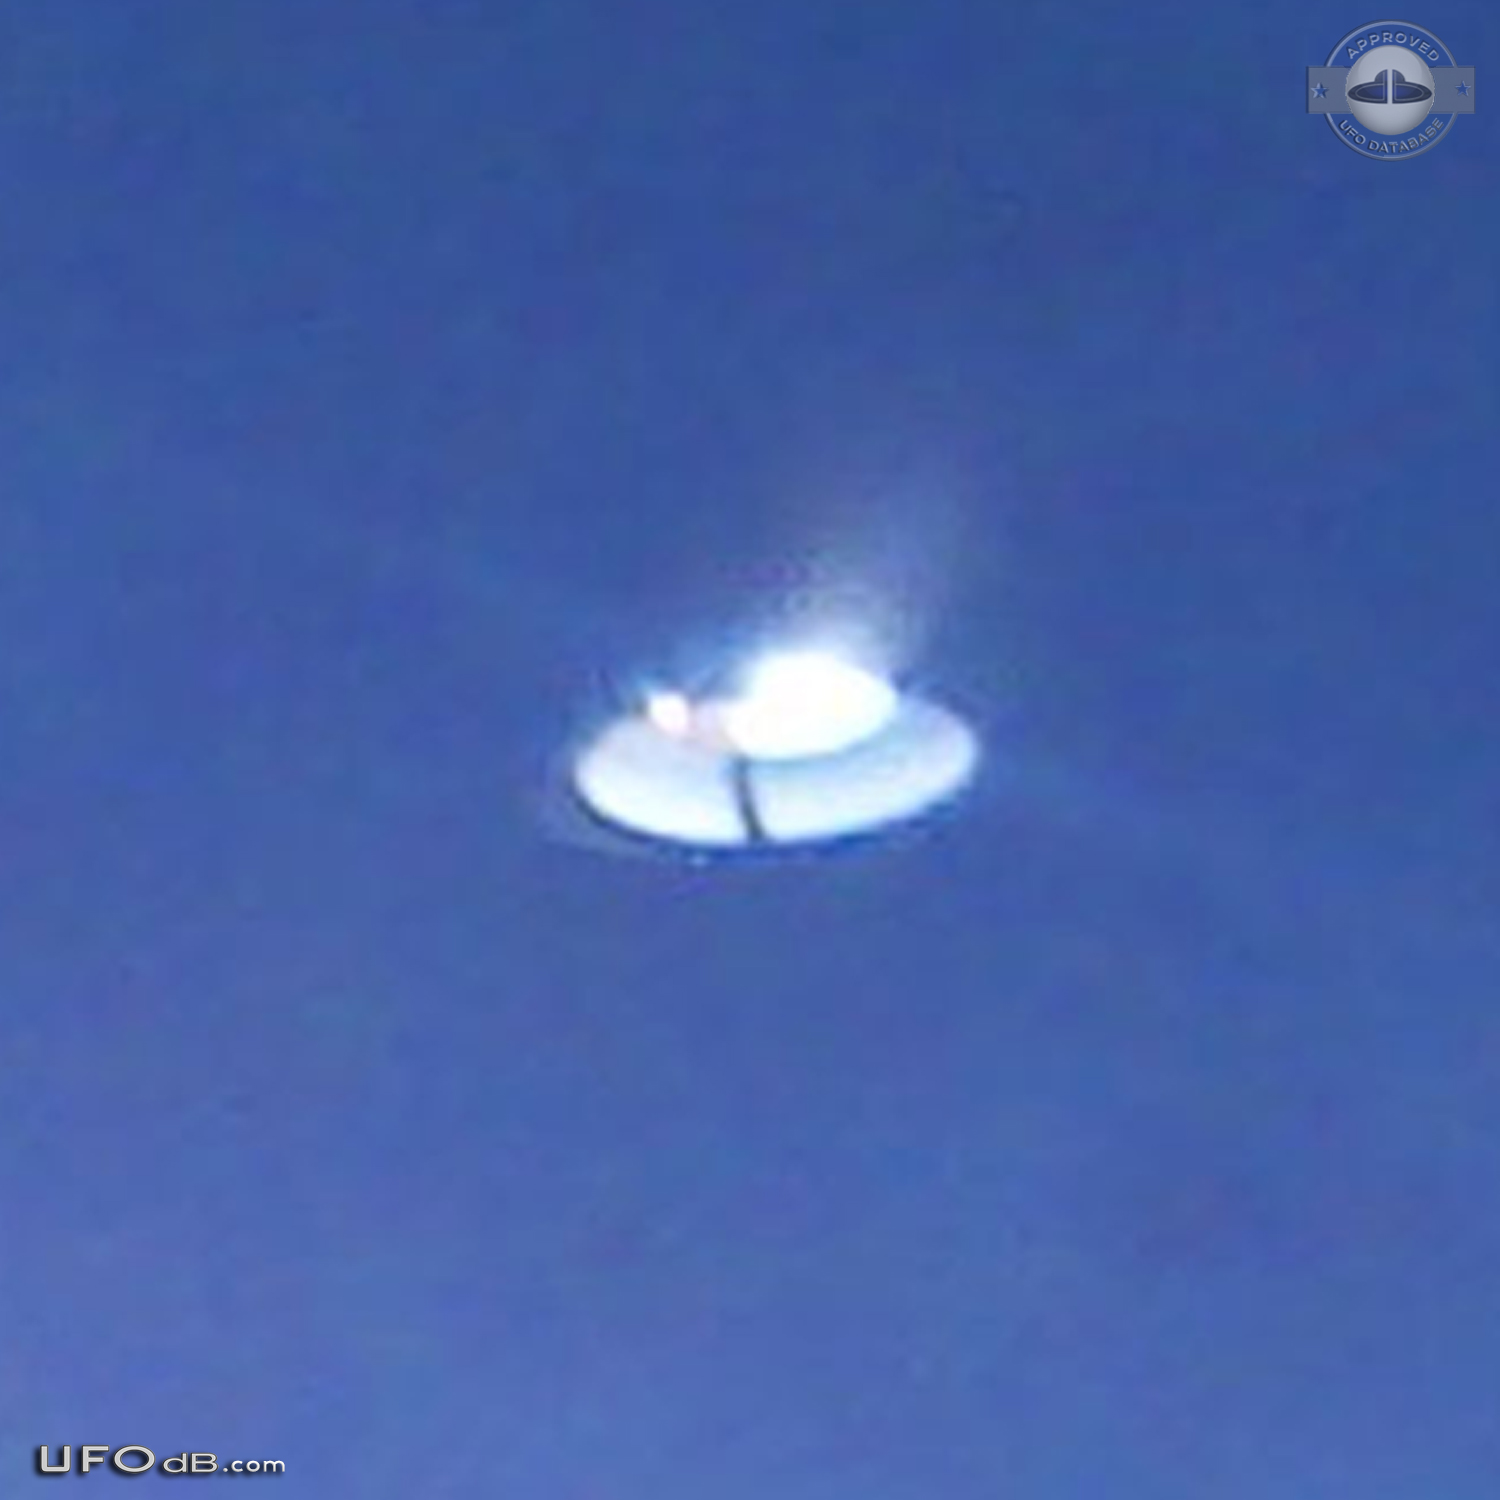 Two Saucer with dome UFOs caught on Picture in the Bahamas - 2012 UFO Picture #495-3